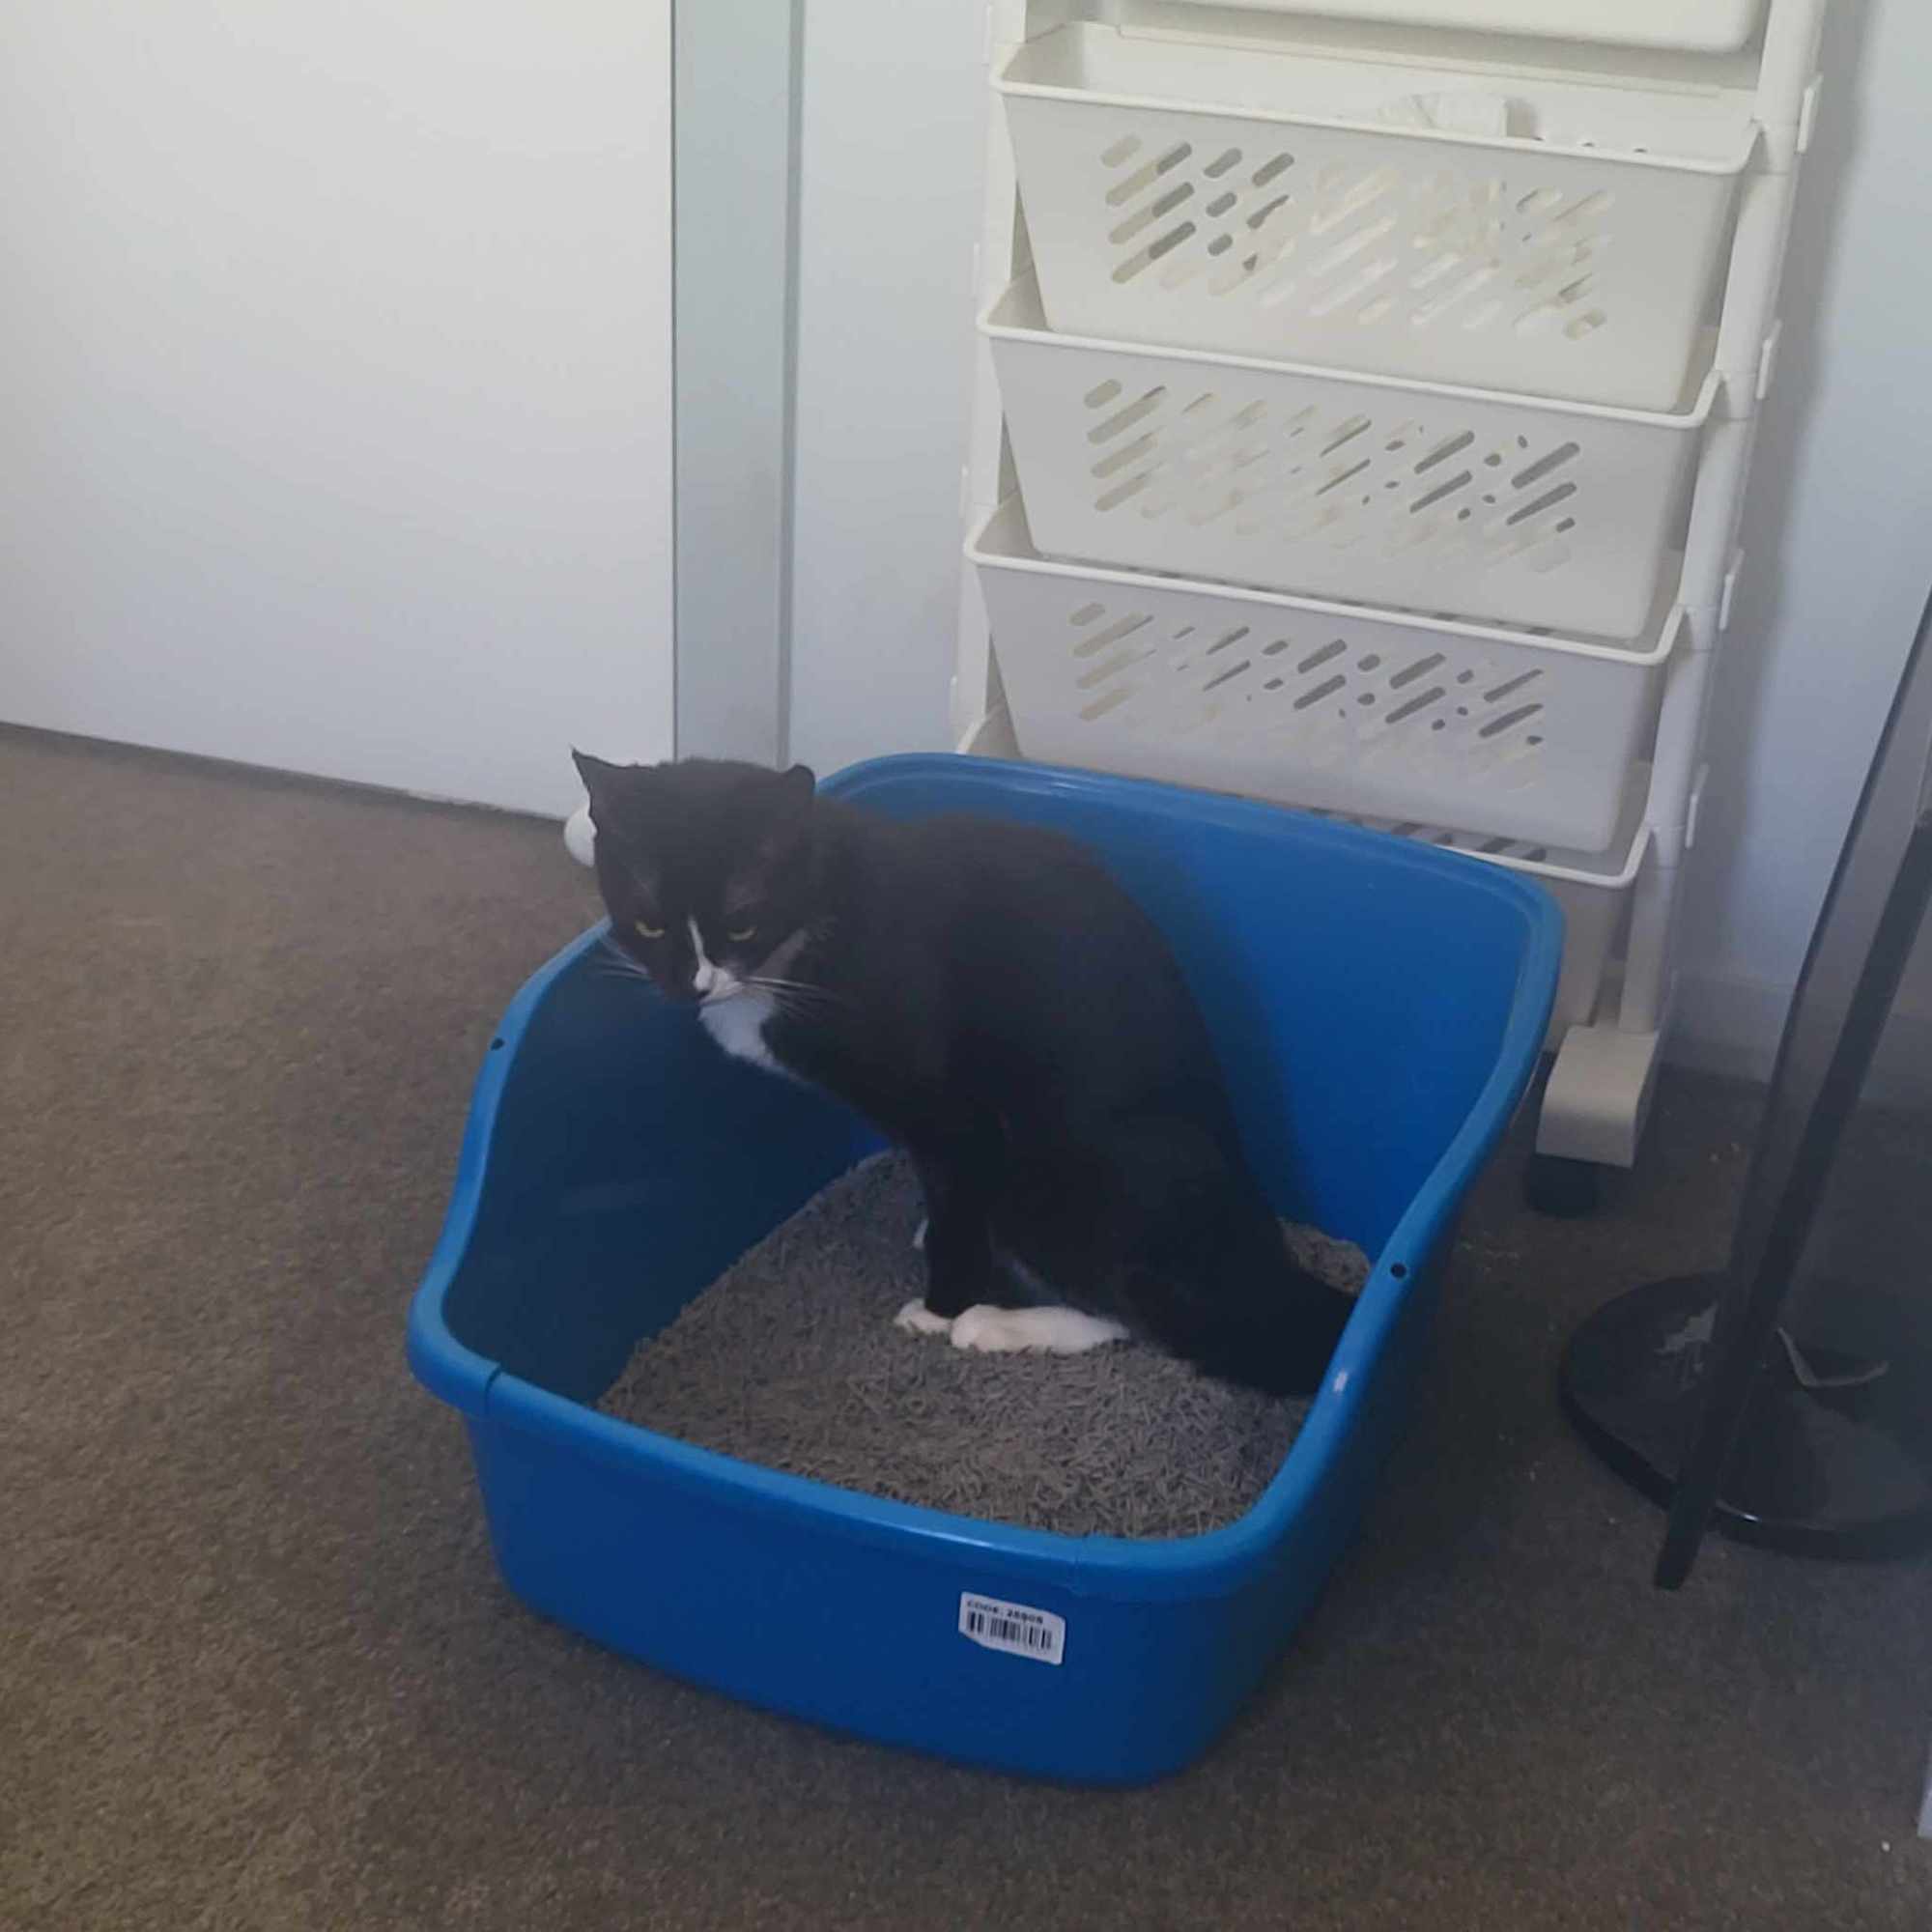 Black and white cat sitting in a blue litter box